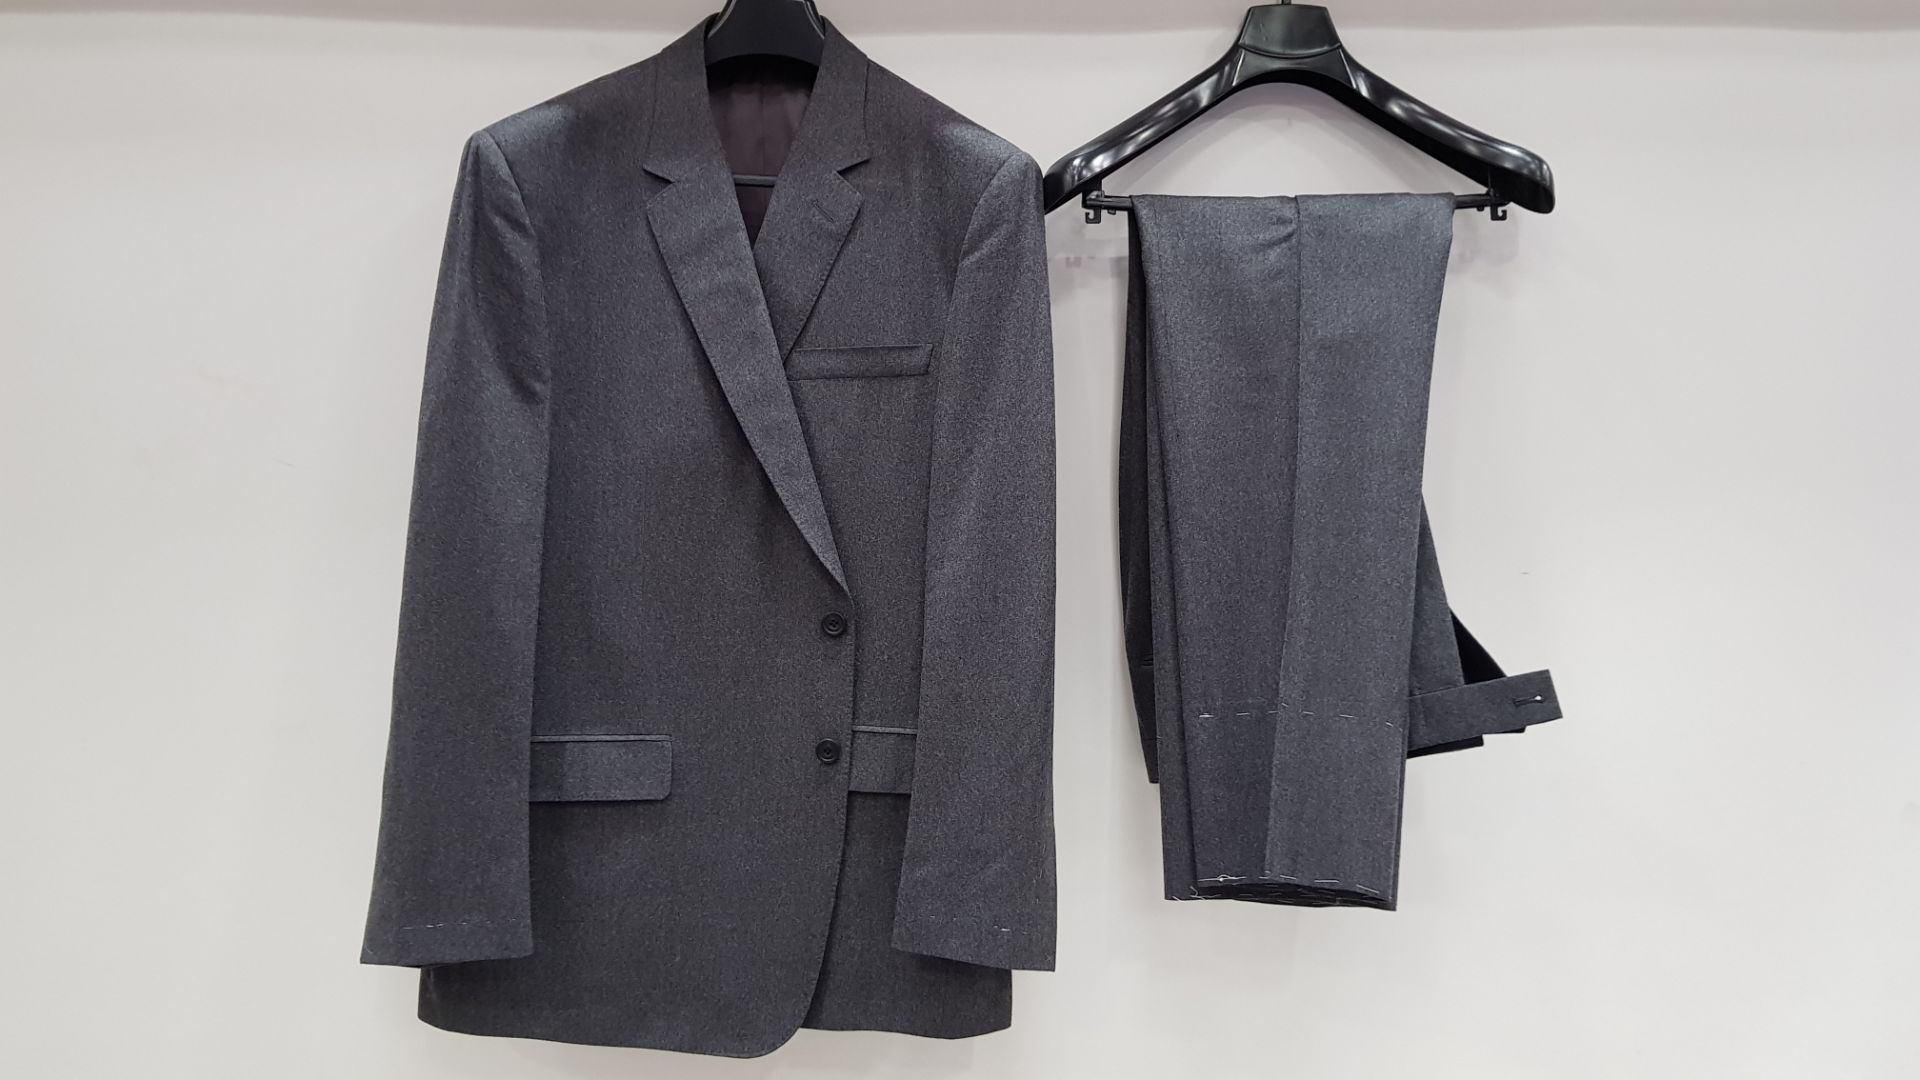 3 X BRAND NEW LUTWYCHE HAND TAILORED GREY PLAIN SUITS SIZE 40R, 44R AND 46R (PLEASE NOTE SUITS ARE